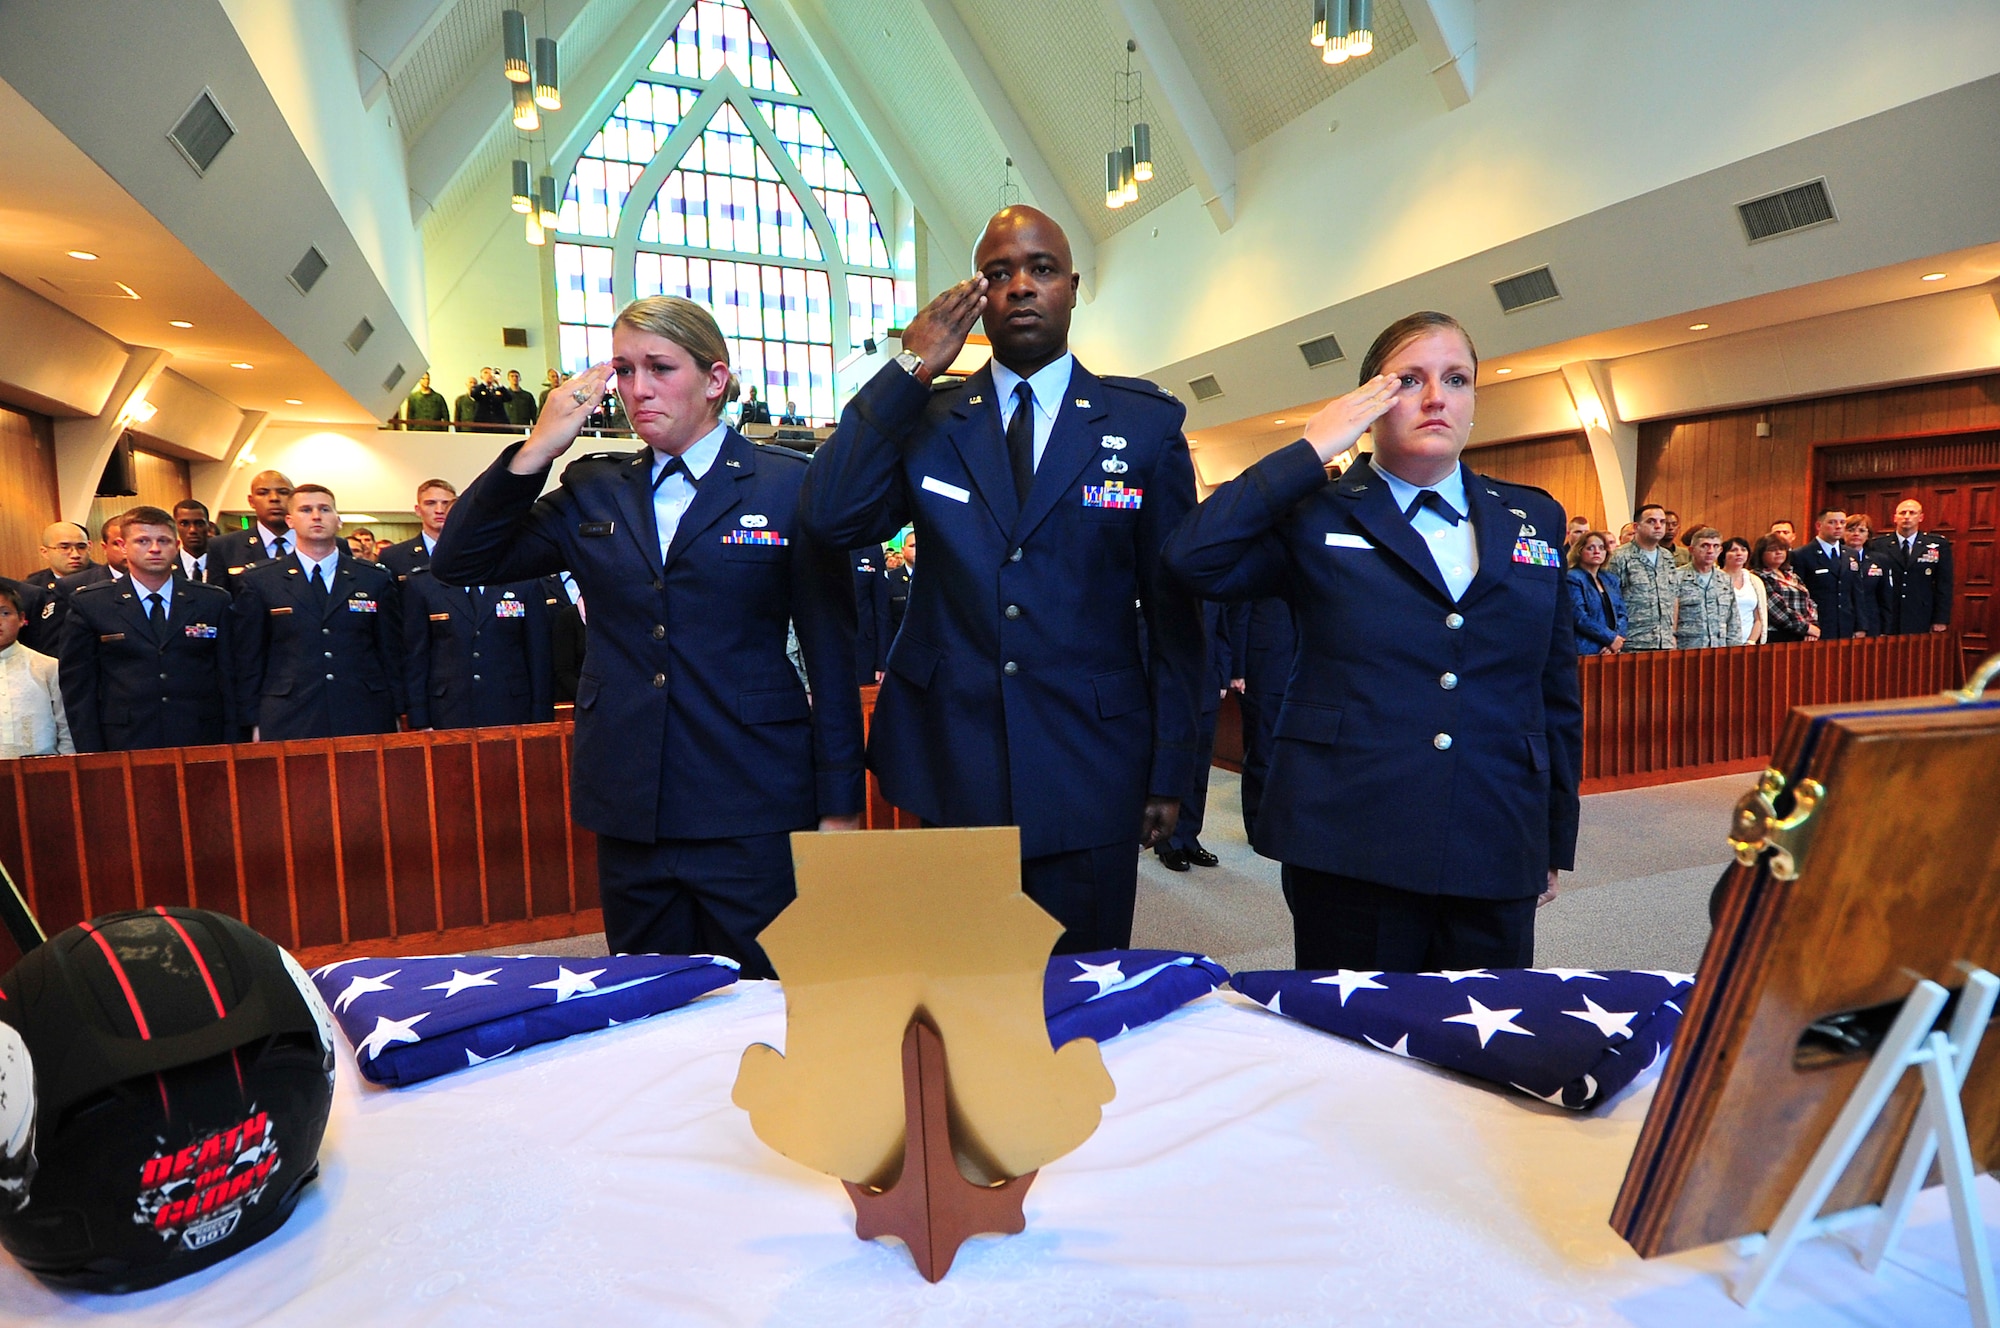 KADENA AIR BASE, Japan -- Officers of the 353rd Maintenance Squadron give a final salute to flags flown on MC-130s for the family of 2nd Lt. Stephen Smith to maintenance officers during a memorial service here April 15. The 28-year-old lieutenant, a maintenance officer with the 353rd MXS, was found dead the morning of April 11 near Cape Hedo, Okinawa, after going missing while snorkeling with friends April 10. (U.S. Air Force photo by Tech. Sgt. Rey Ramon)